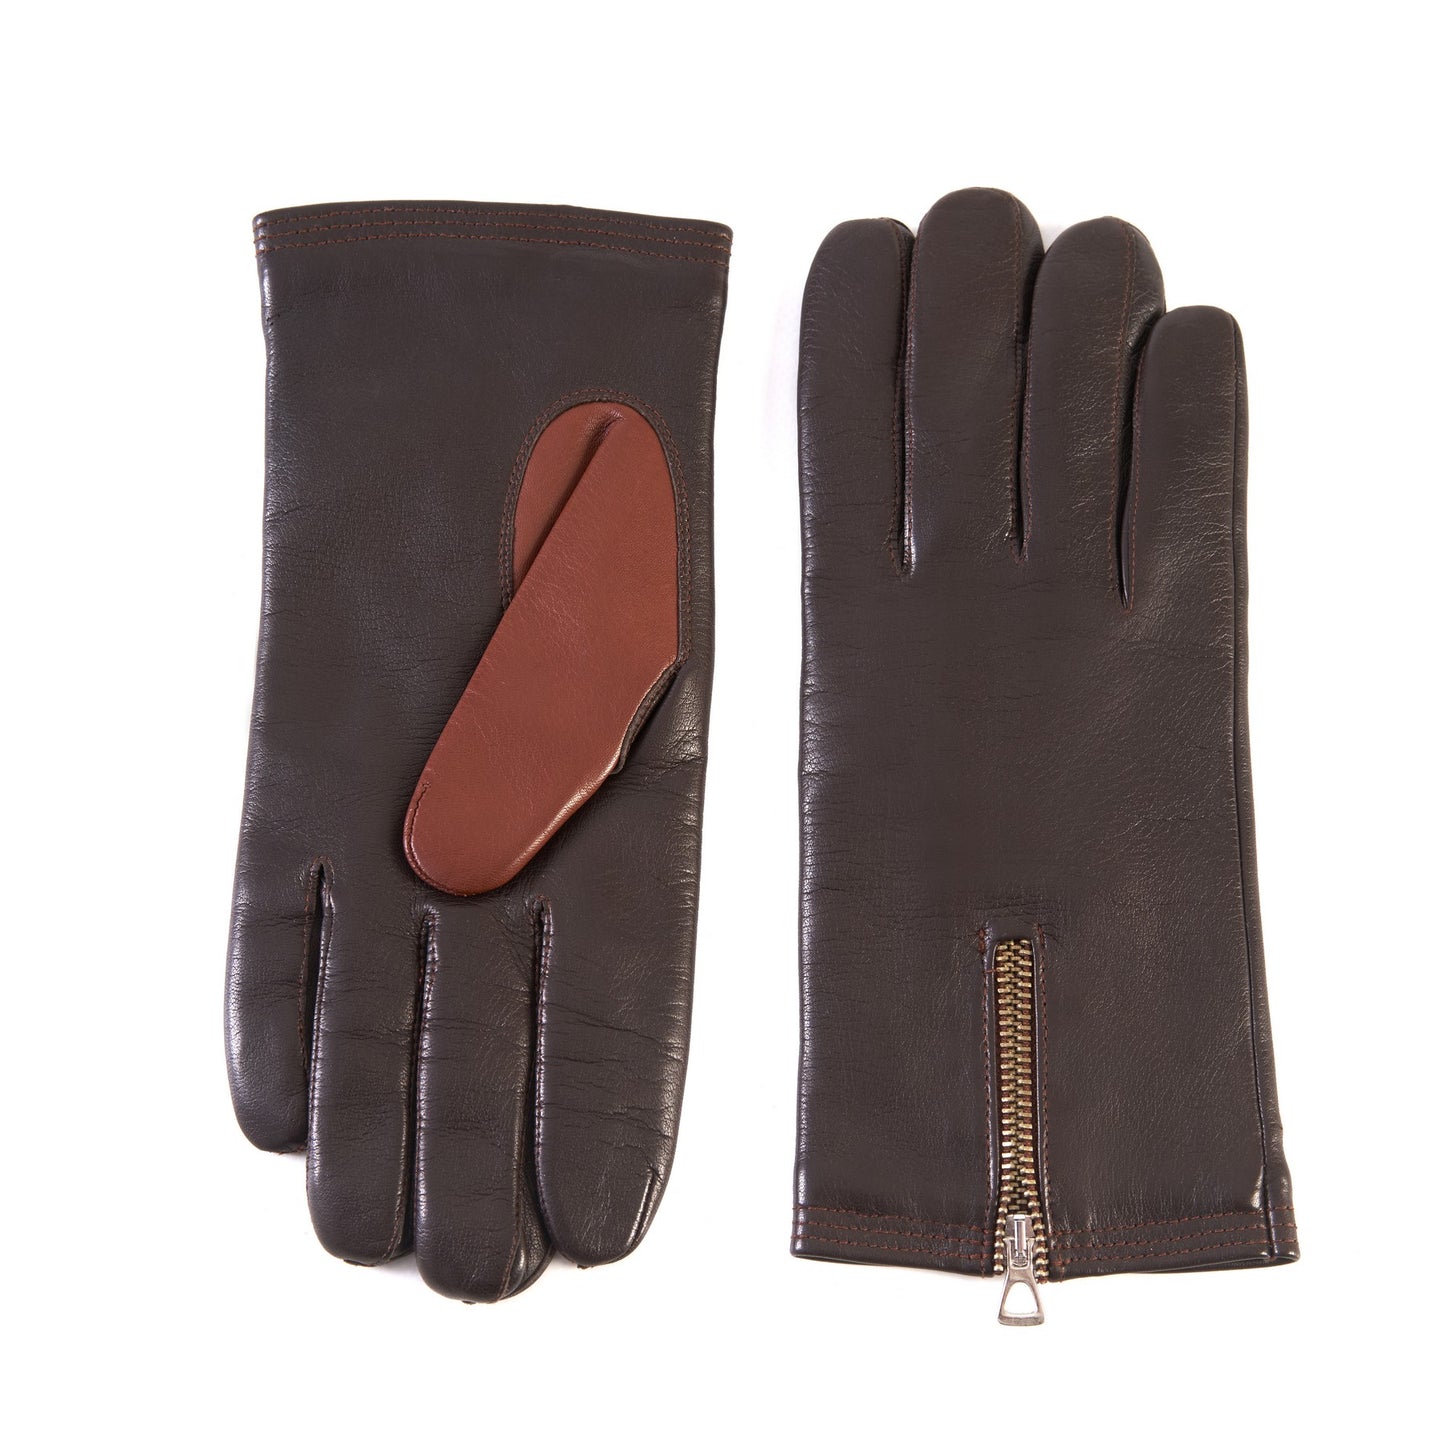 Men's brown nappa leather gloves with cognac thumb and stitching with zip and cashmere lined